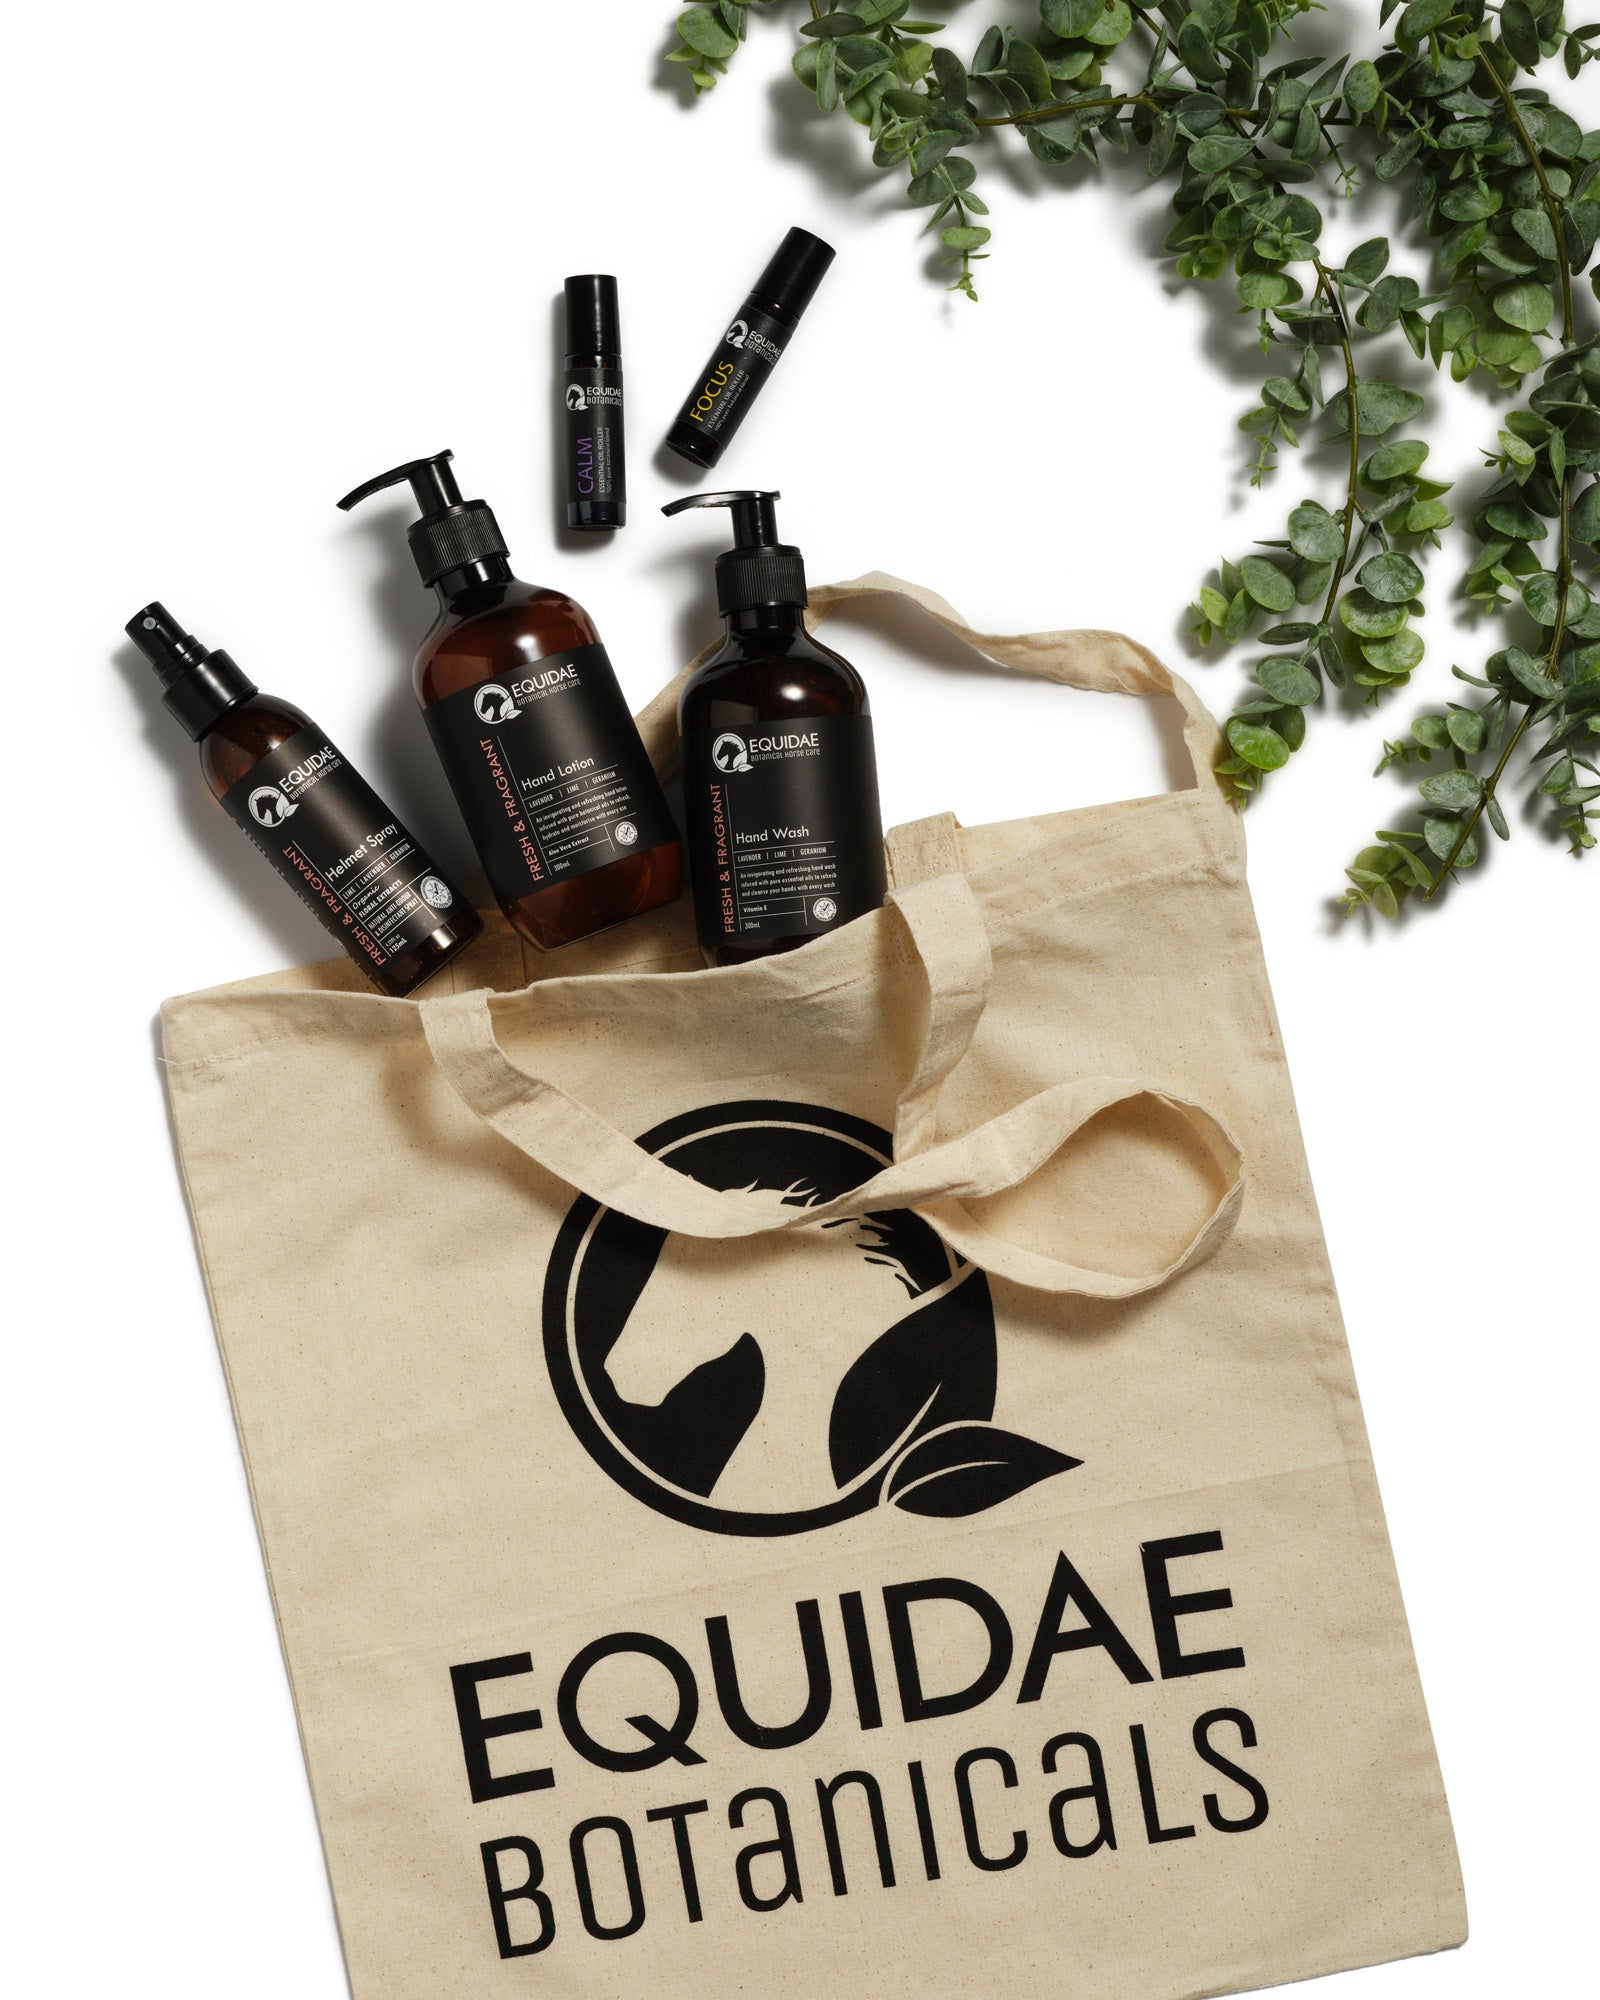 Equidae Calico Goodie bag, ethical and non toxic